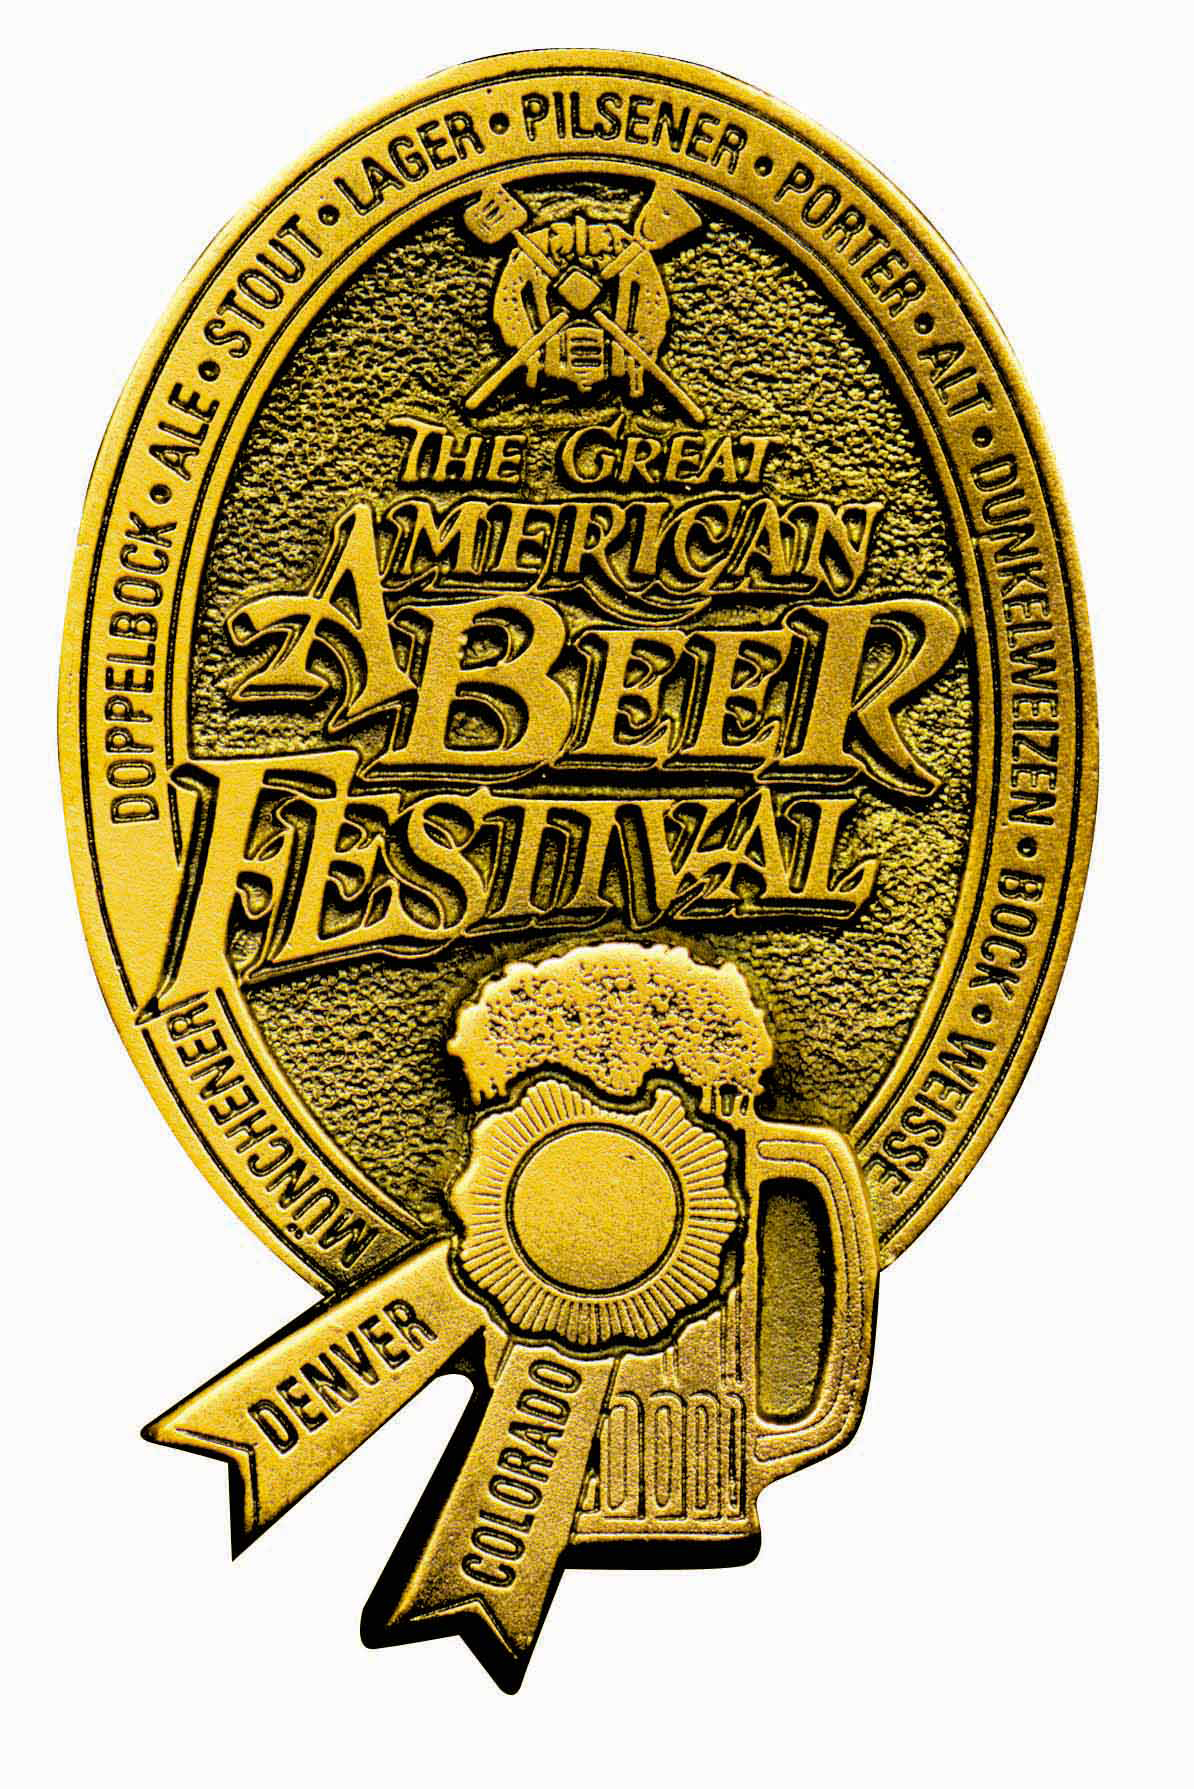 image sourced from the Great American Beer Festival